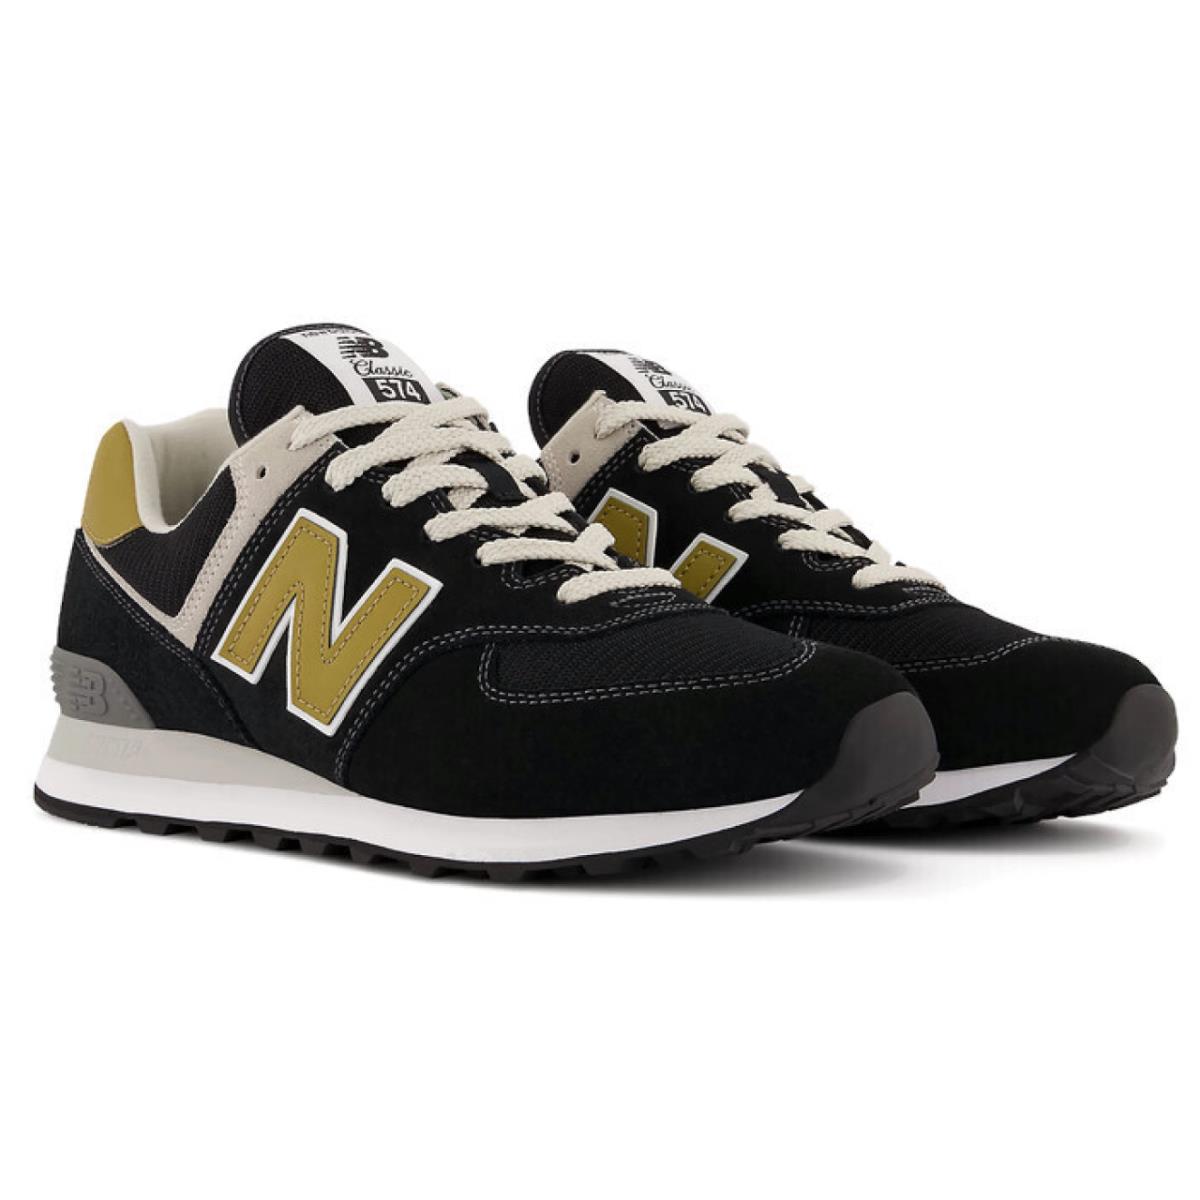 New Balance shoes  - Black , Black with tan Manufacturer 2